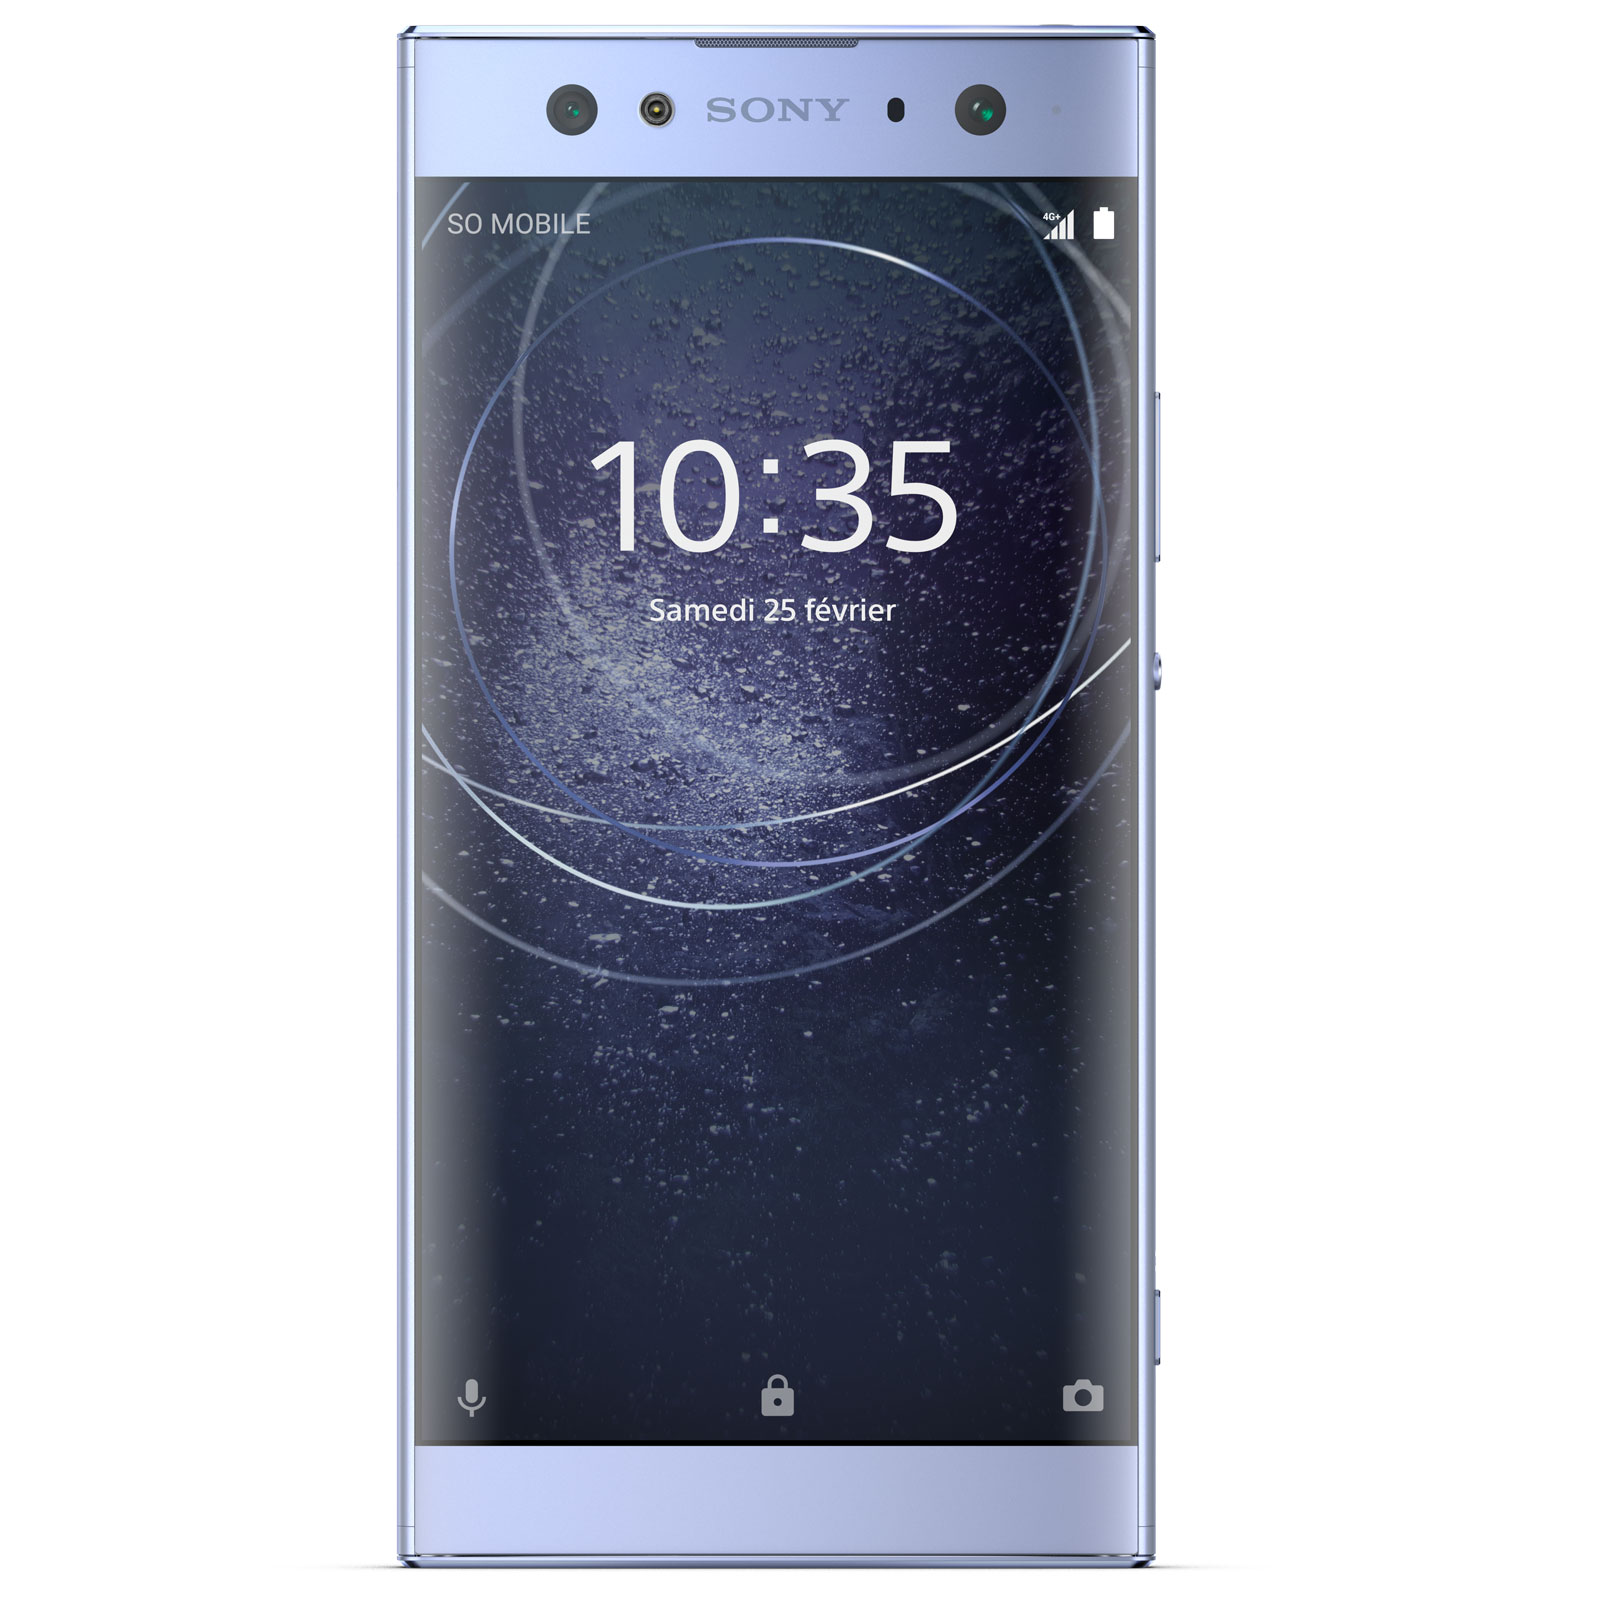 Introducing the Sony smartphone with two selfie cameras.Get the best shot in any situation: day, night, alone or with friends, the Xperia XA2 Ultra has a 16MP camera for low light images and an 8MP camera for super wide group selfies.